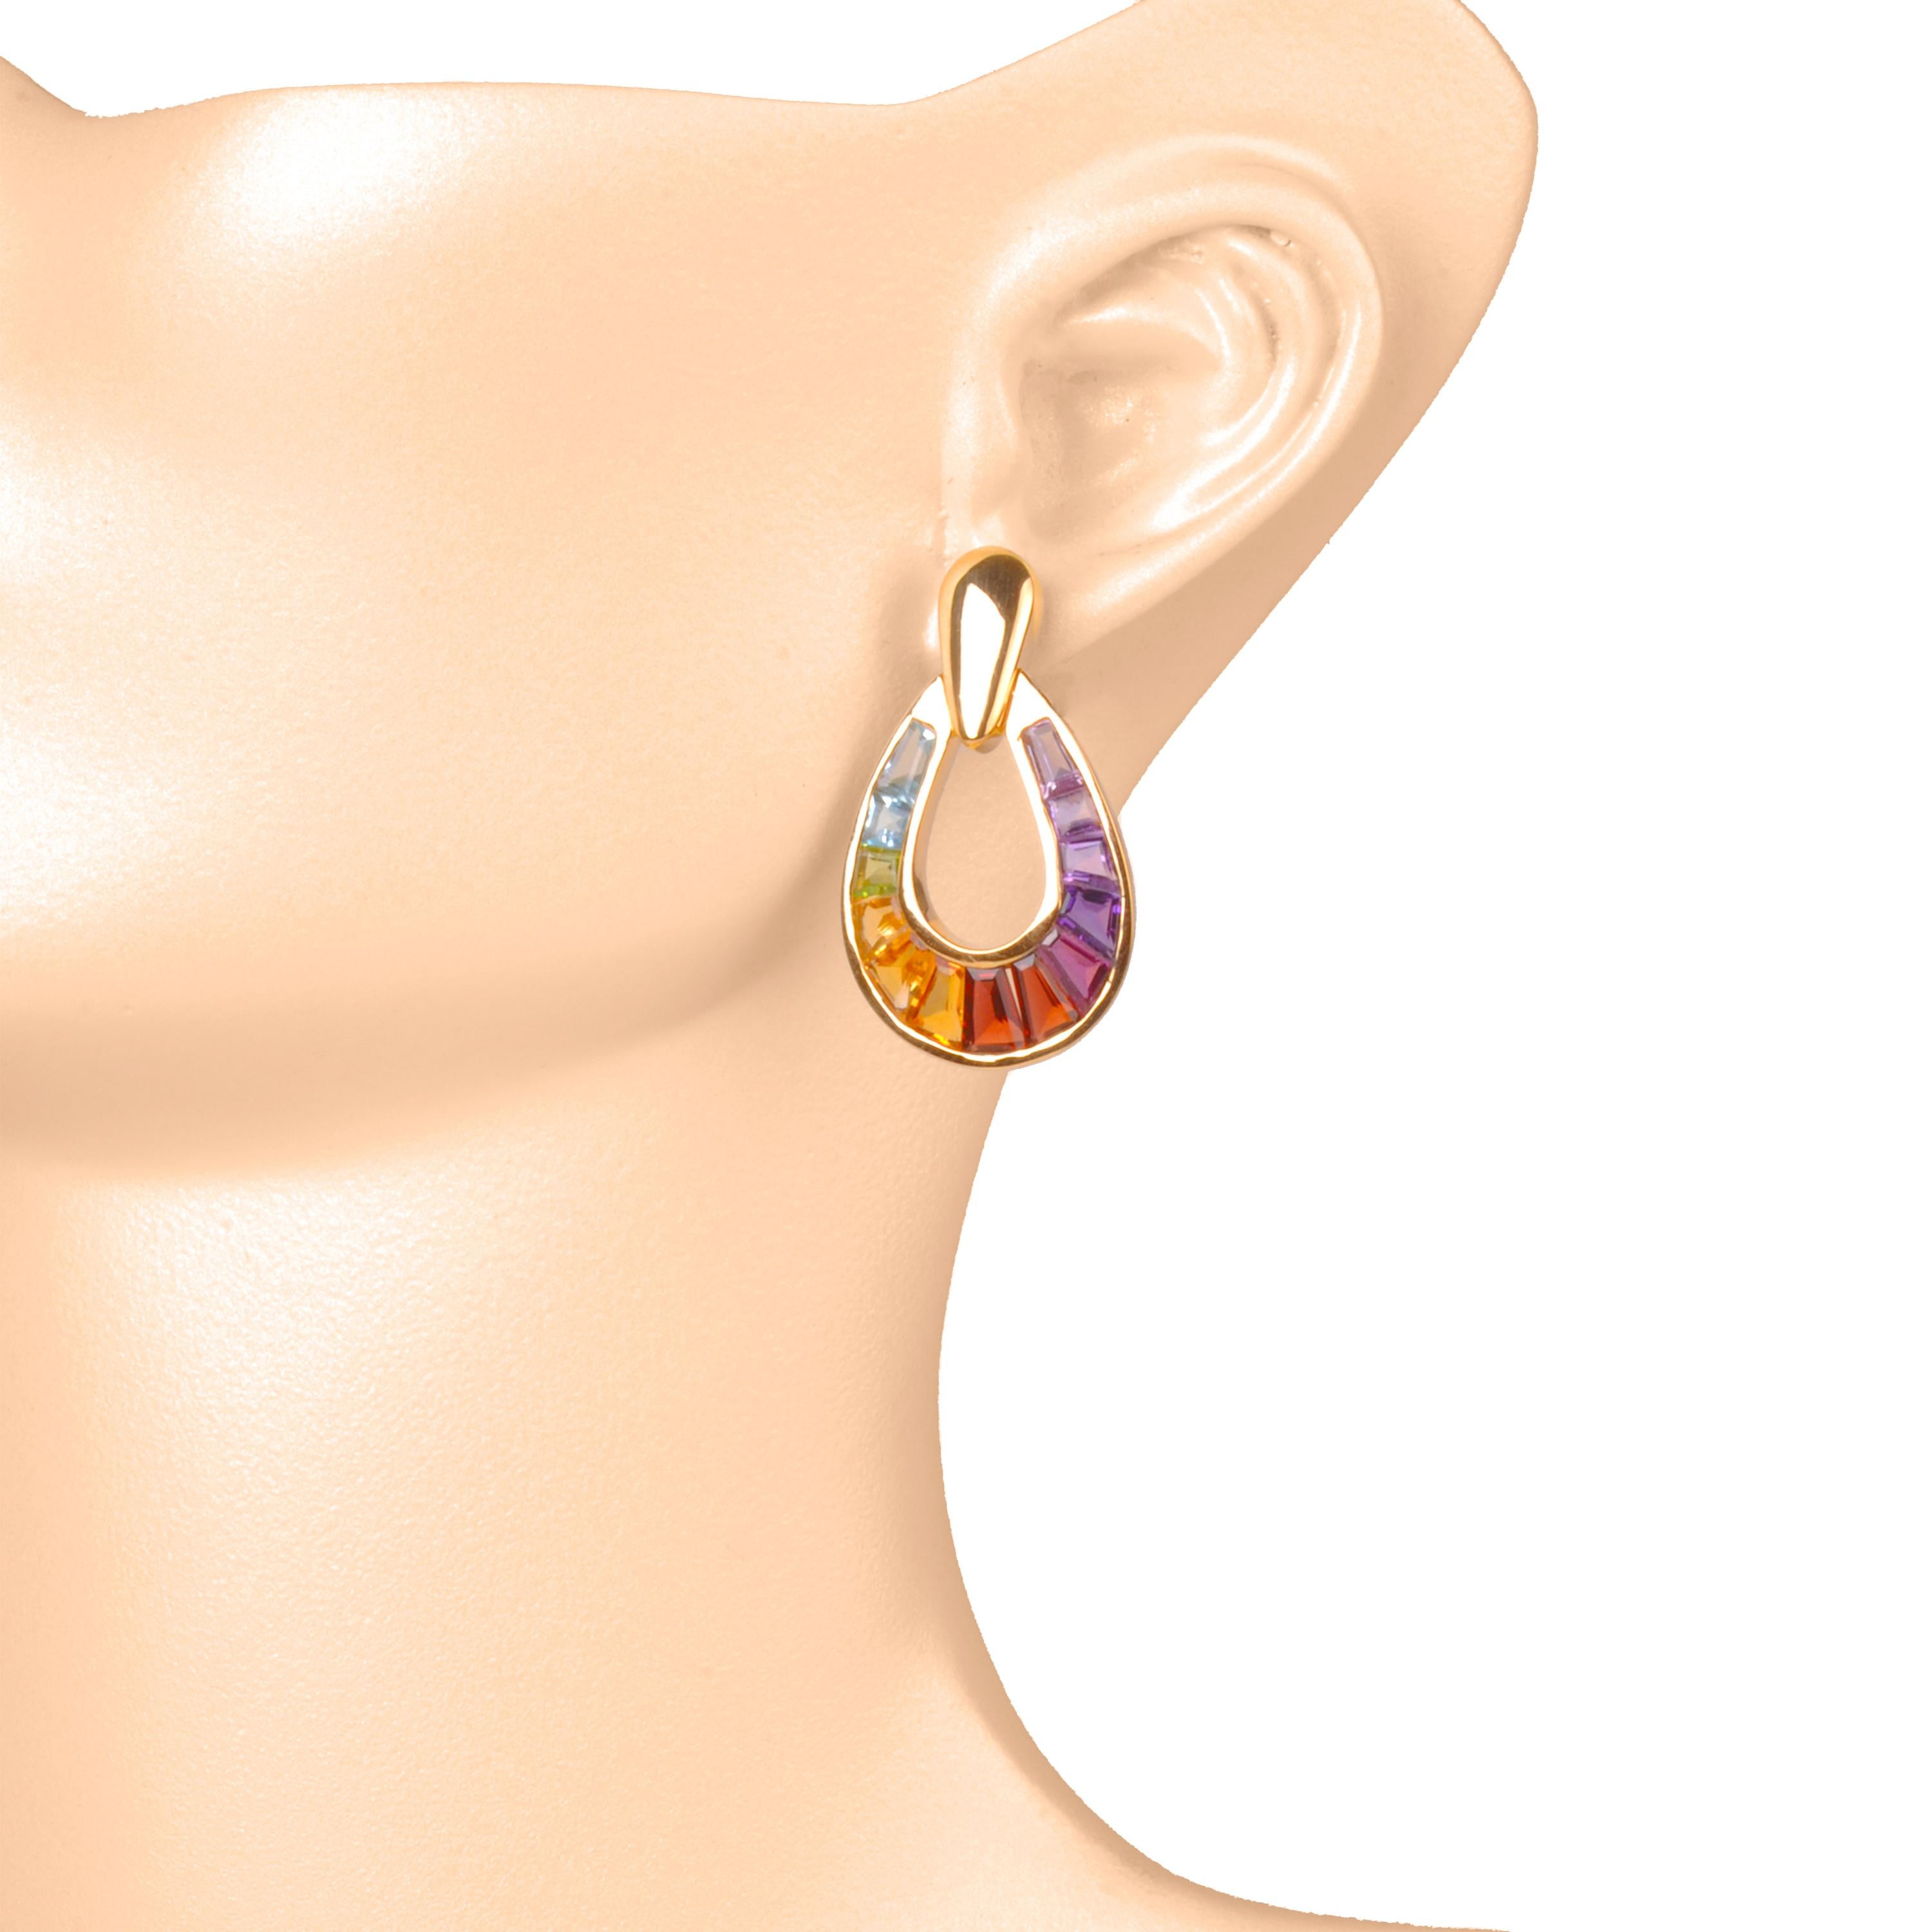 18k gold raindrop channel-set rainbow taper baguette gemstones dangle earrings

Immerse yourself in a world of enchantment with our stunning multicolor raindrop earrings. A fusion of art and color, these earrings are a breathtaking display of